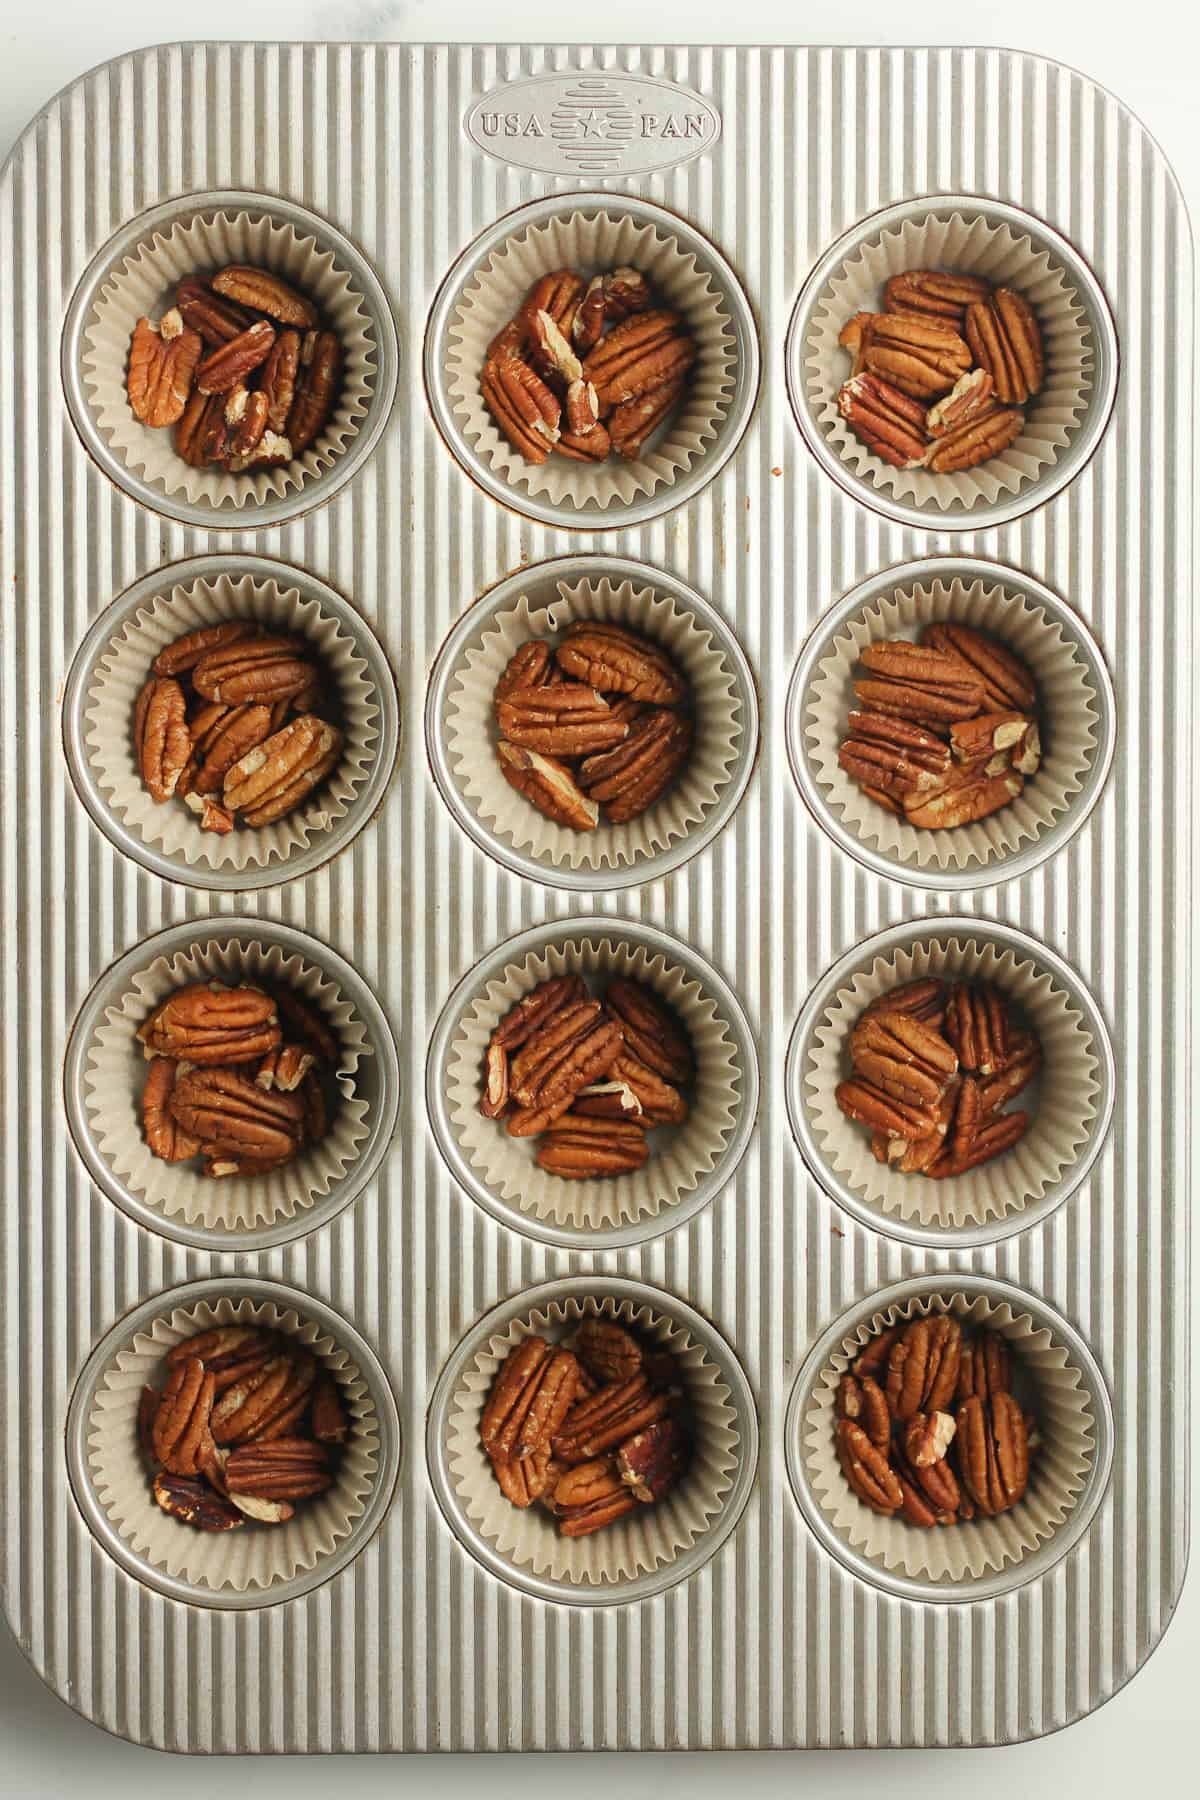 A 12-cup muffin pan with pecans on the bottom.